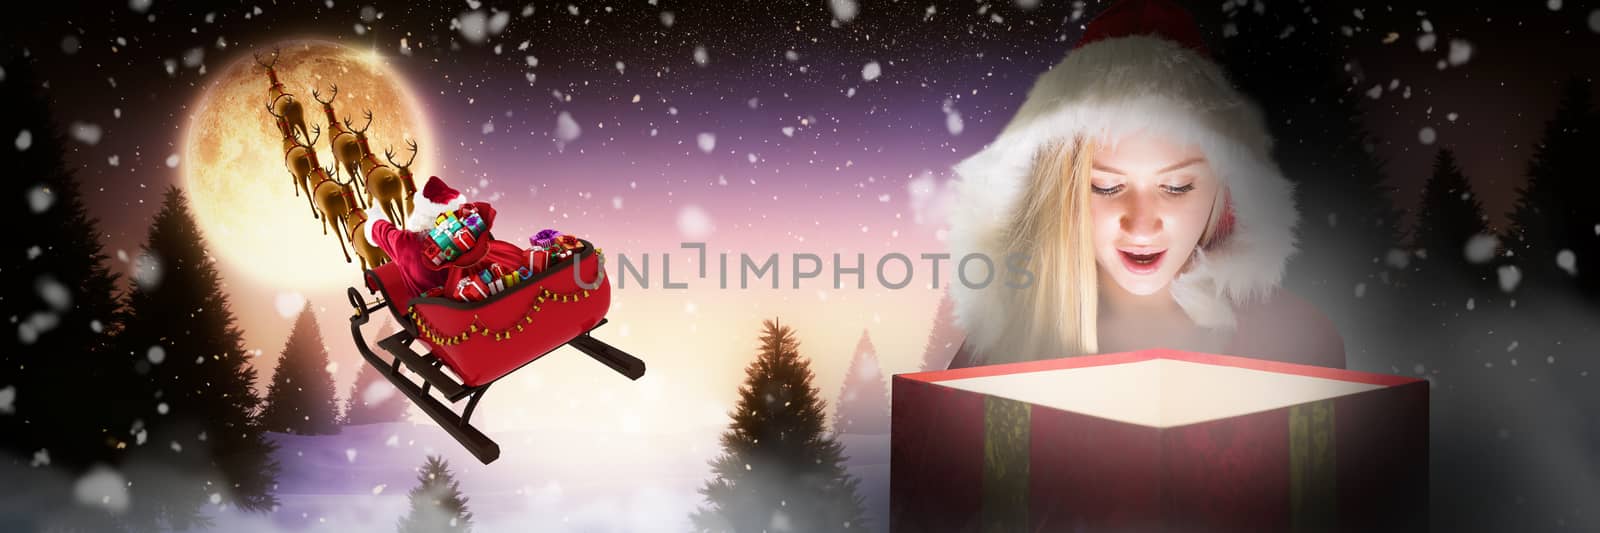 Composite image of festive blonde looking into glowing gift by Wavebreakmedia